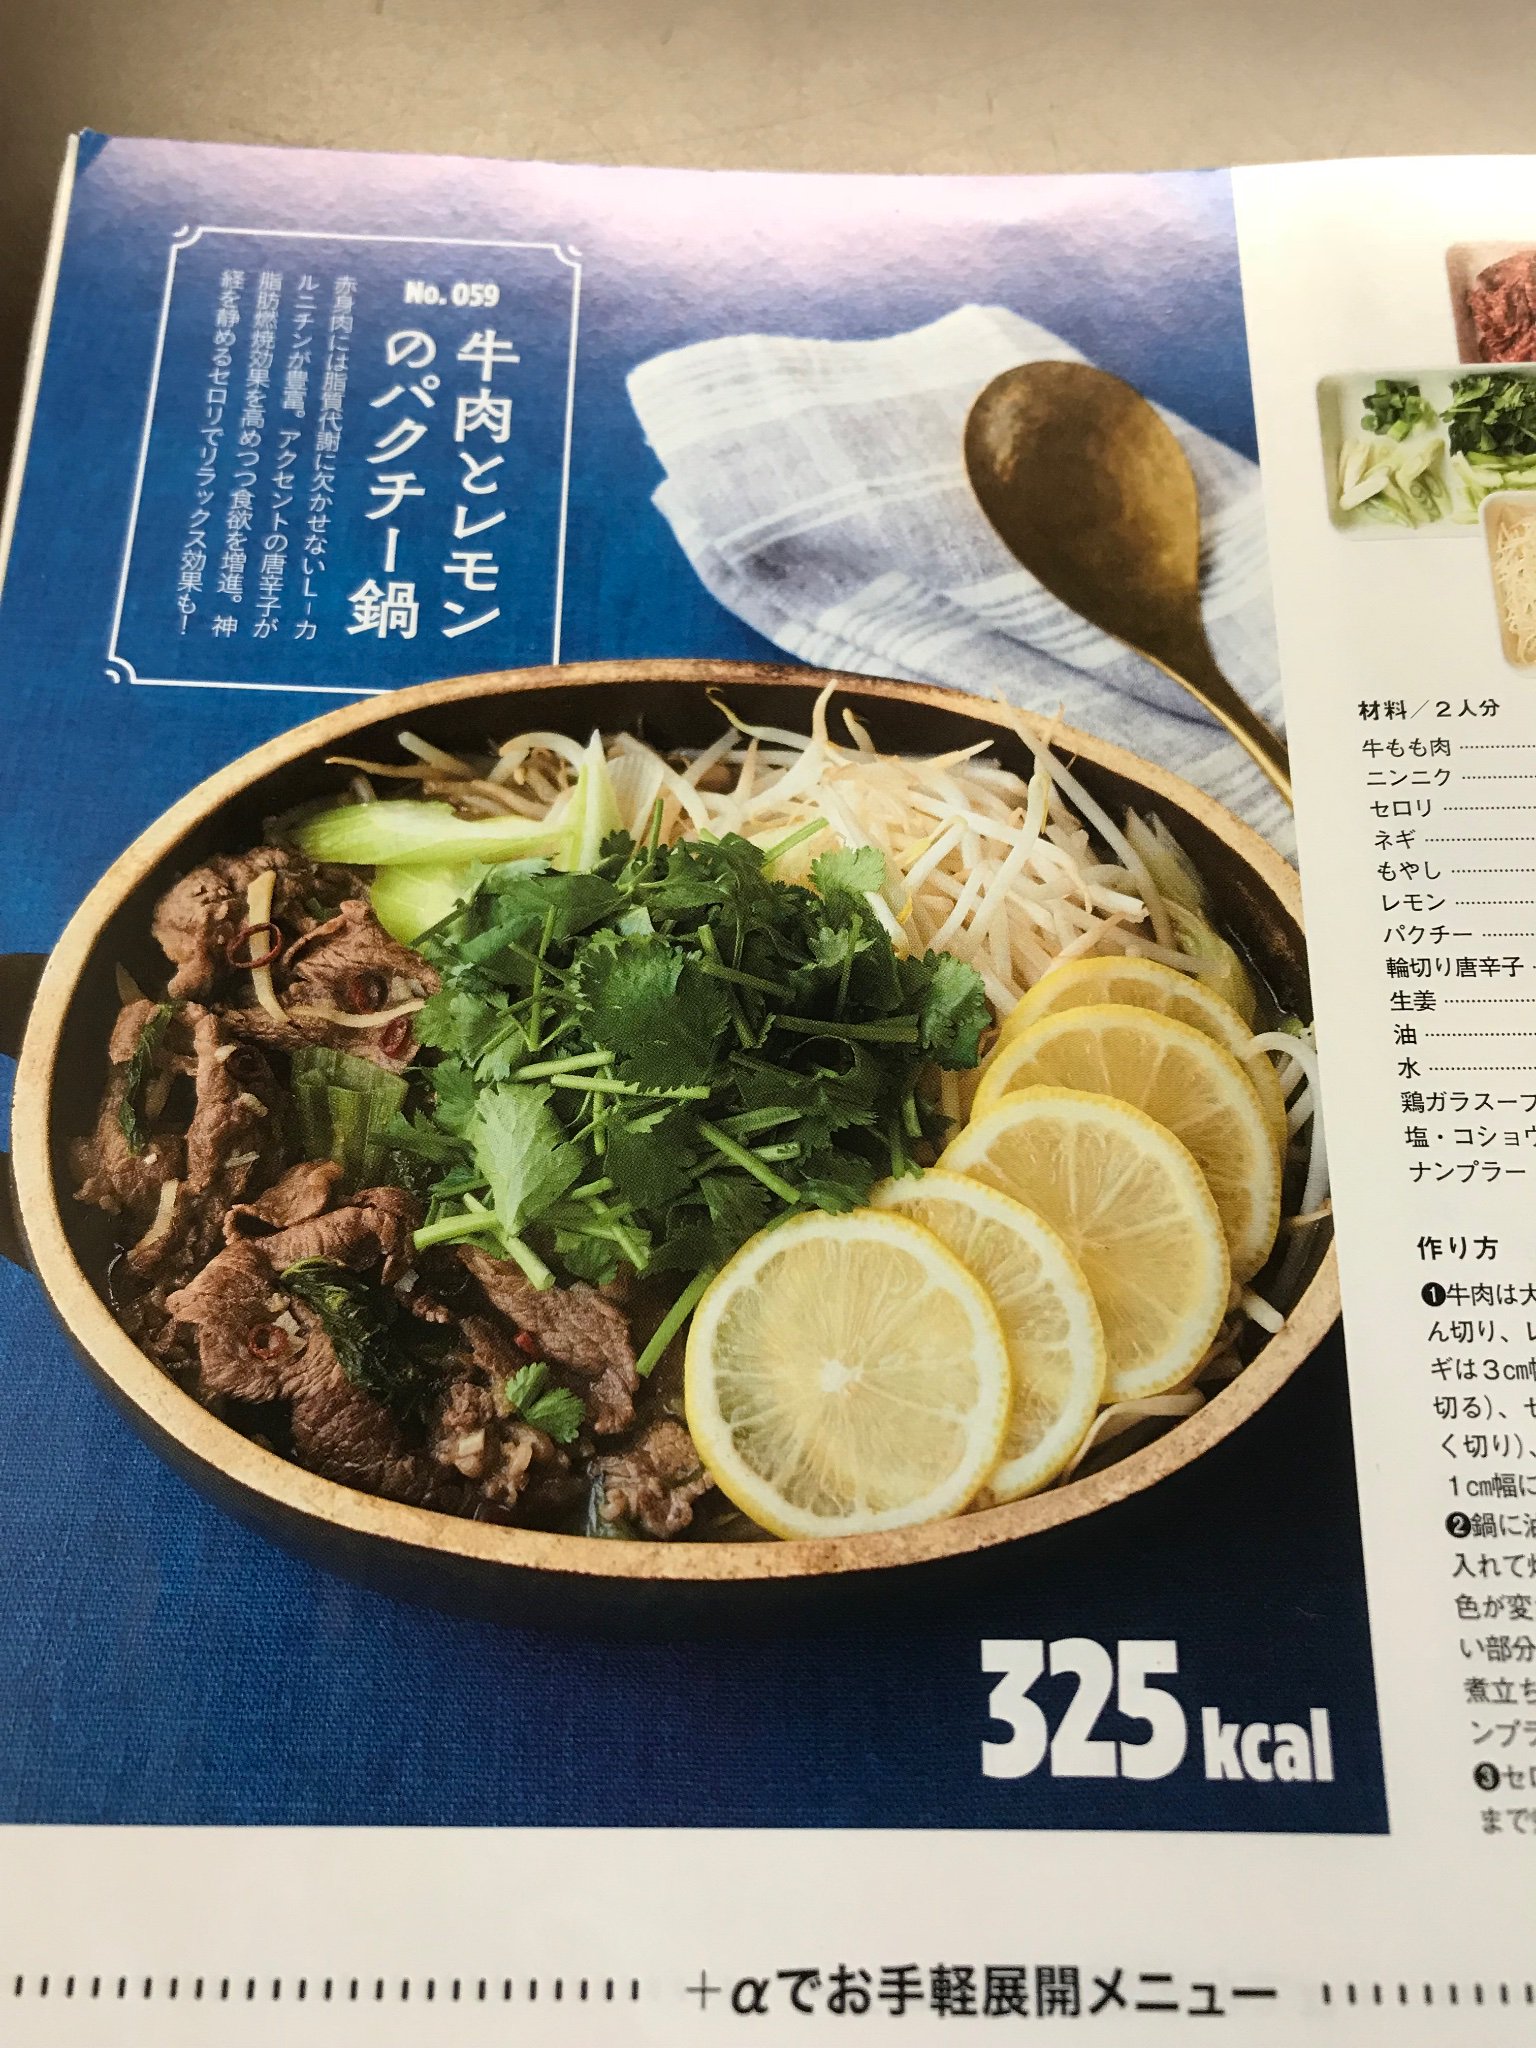 Kaoru En Twitter I M So Hungry Will Try To Cook This For Dinner Hope The Dishe Is So Great パクチー T Co Ftcs87amsa Twitter